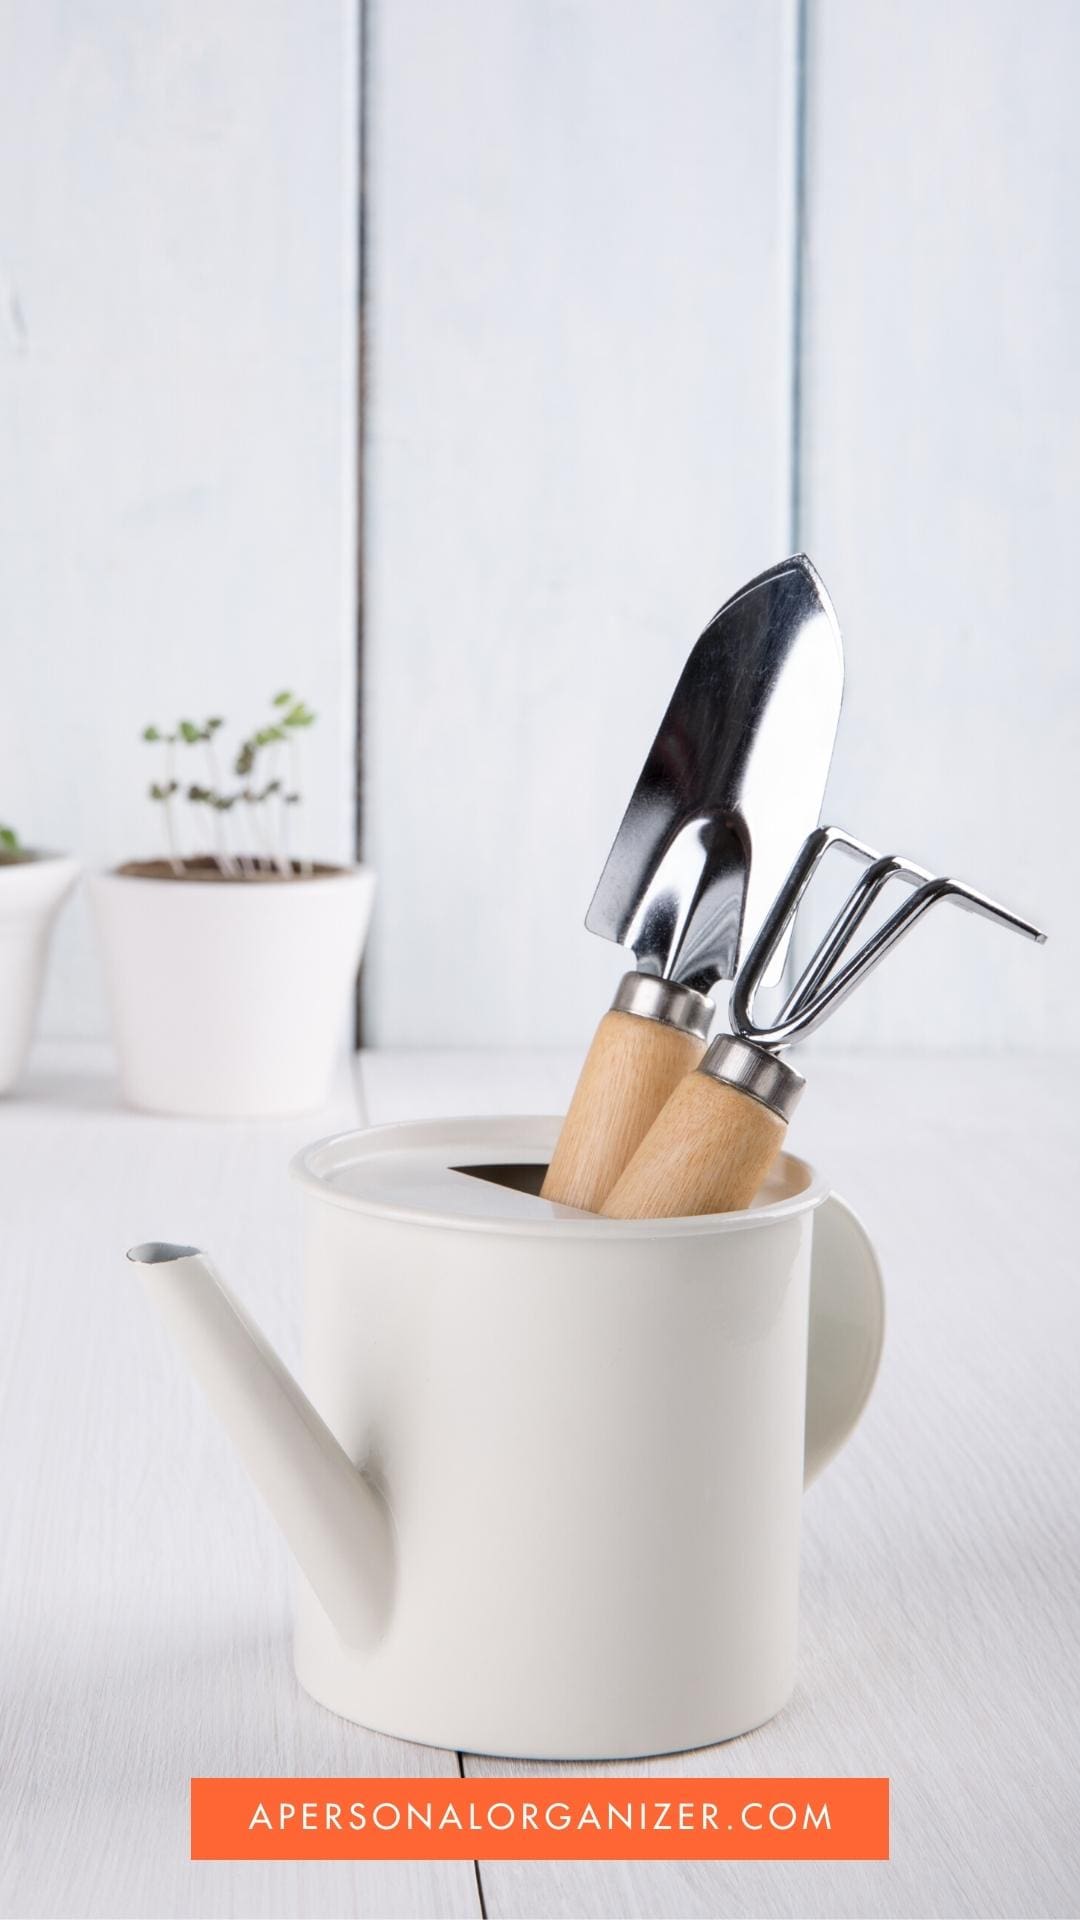 How To Care For Your Gardening Tools For Years To Come